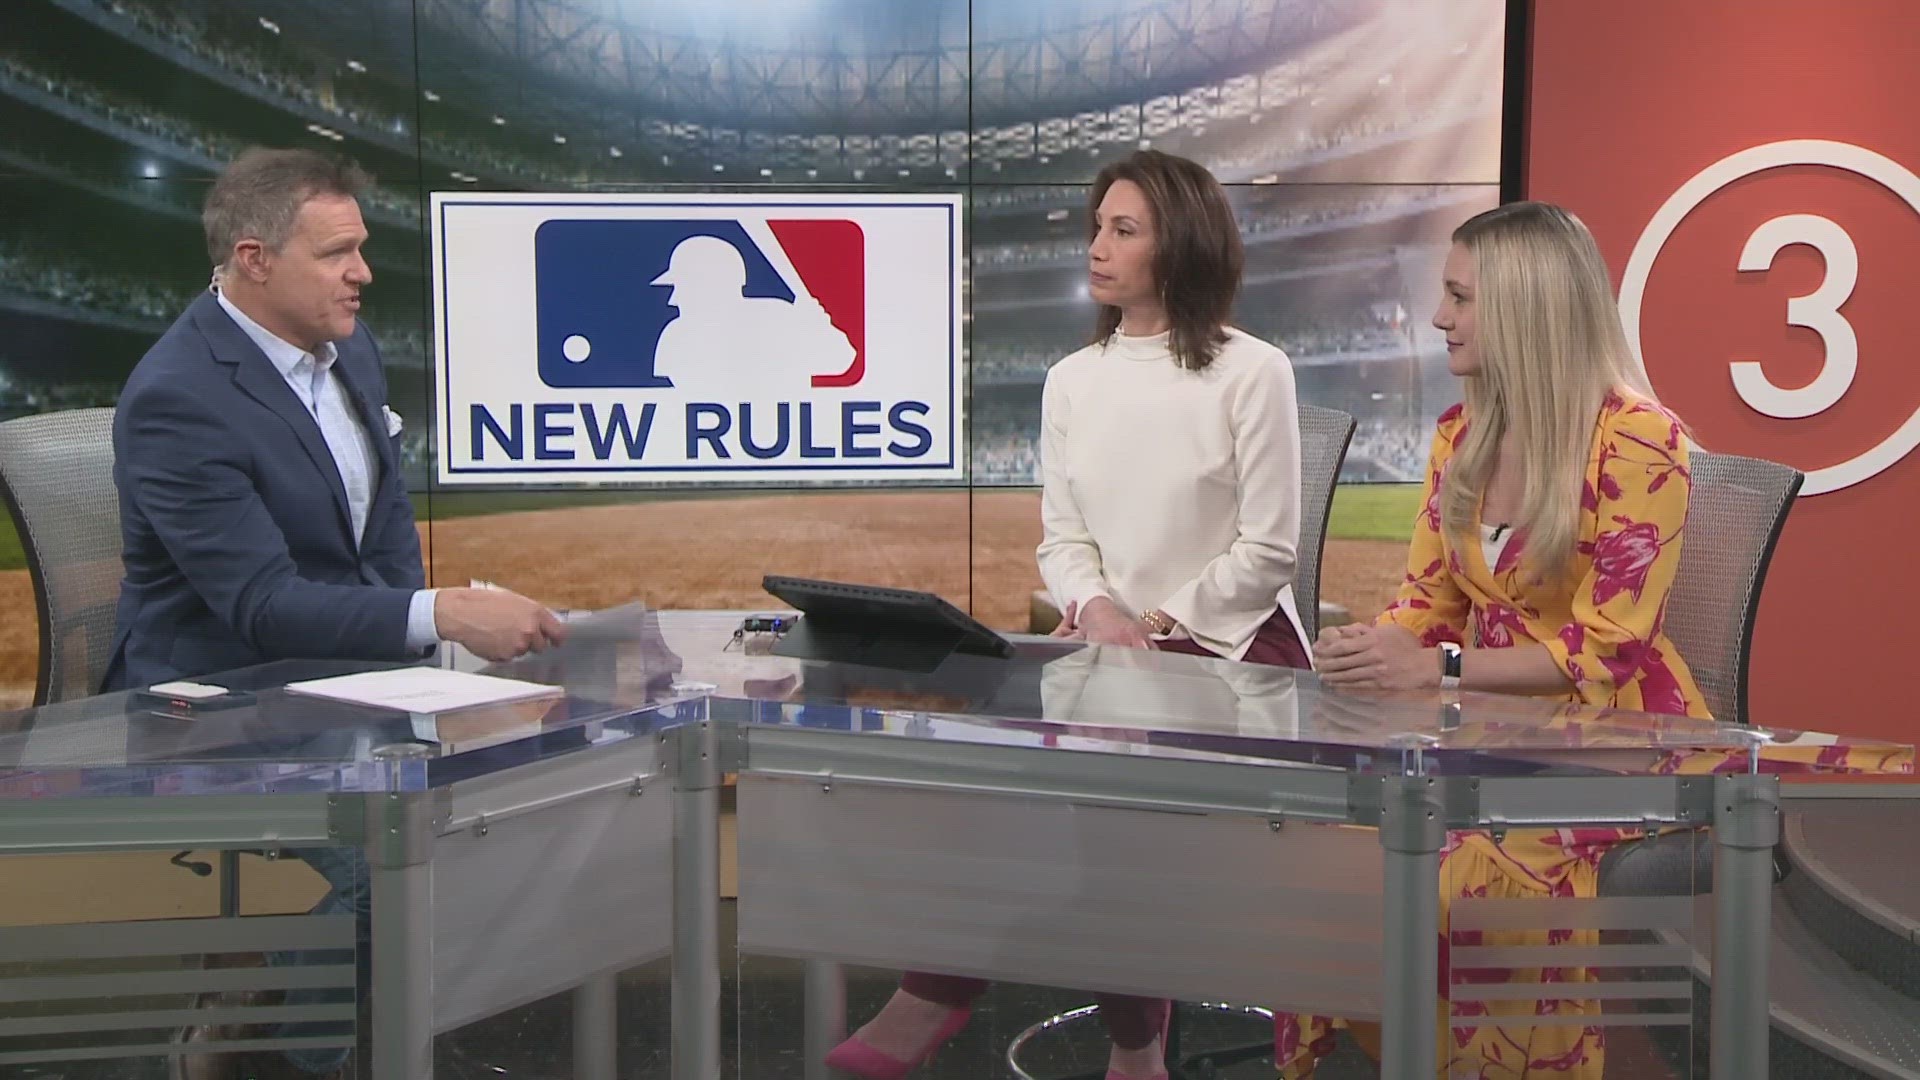 The 2023 MLB season is nearly one month old. With that in mind, we're asking what you think of baseball's new rules.